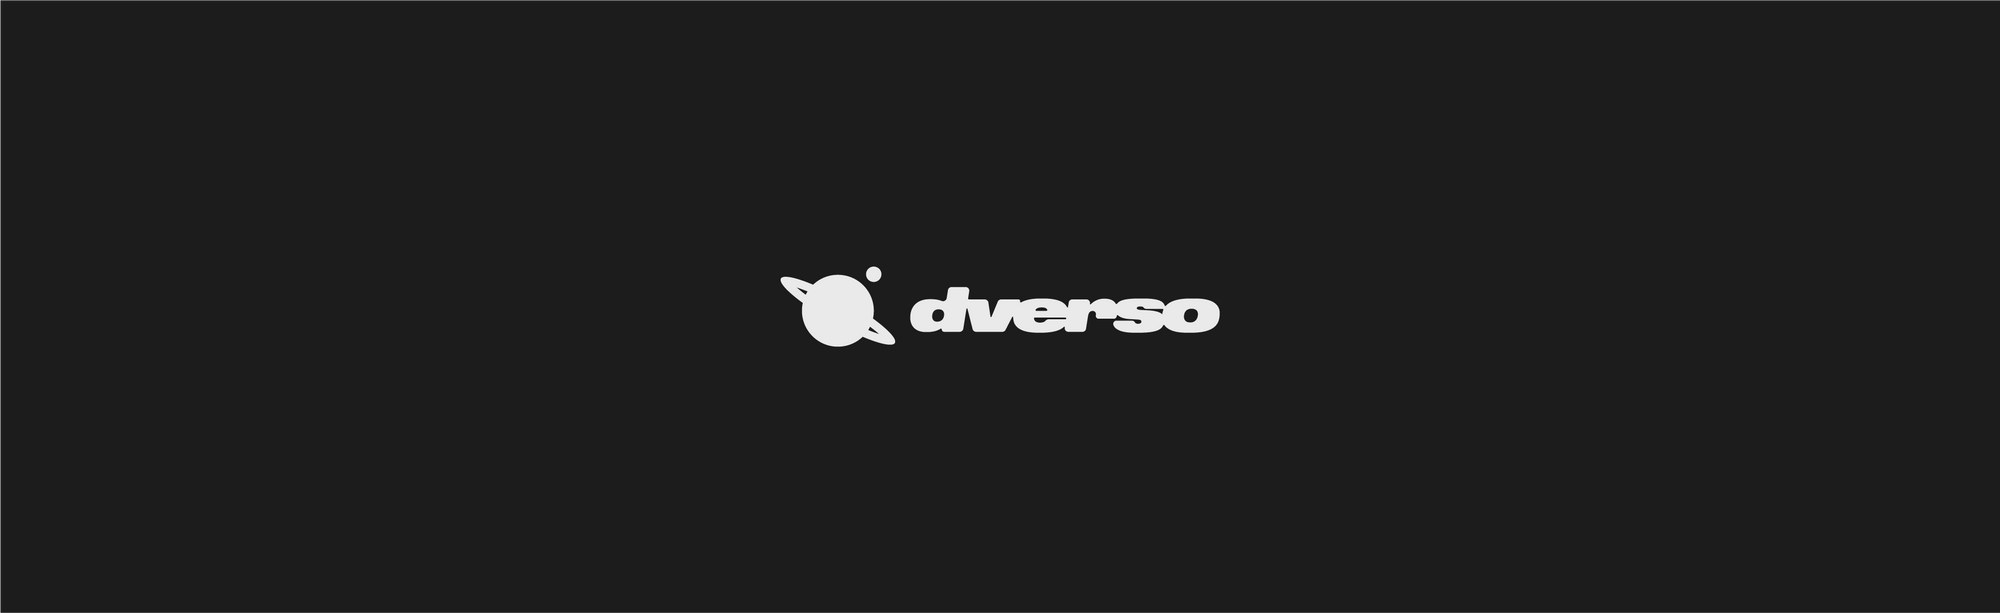 Dverso Launches Open Alpha of Italy’s Leading Web3 Metaverse